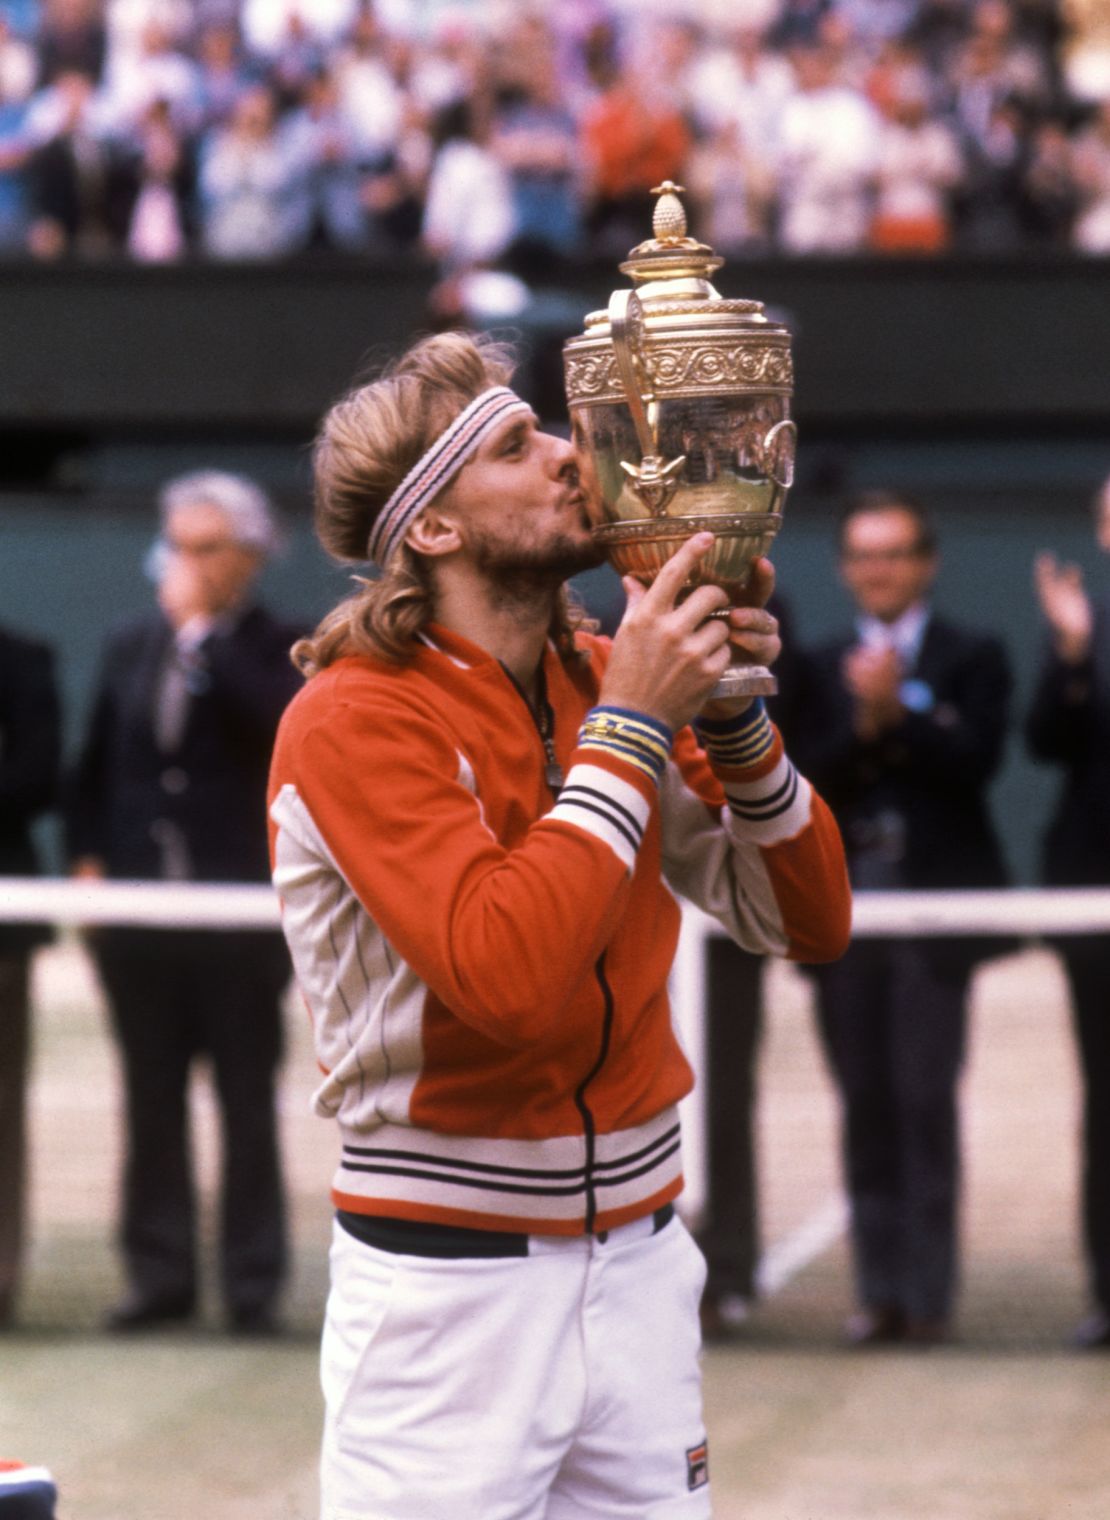 Borg with the Wimbledon trophy in 1980.